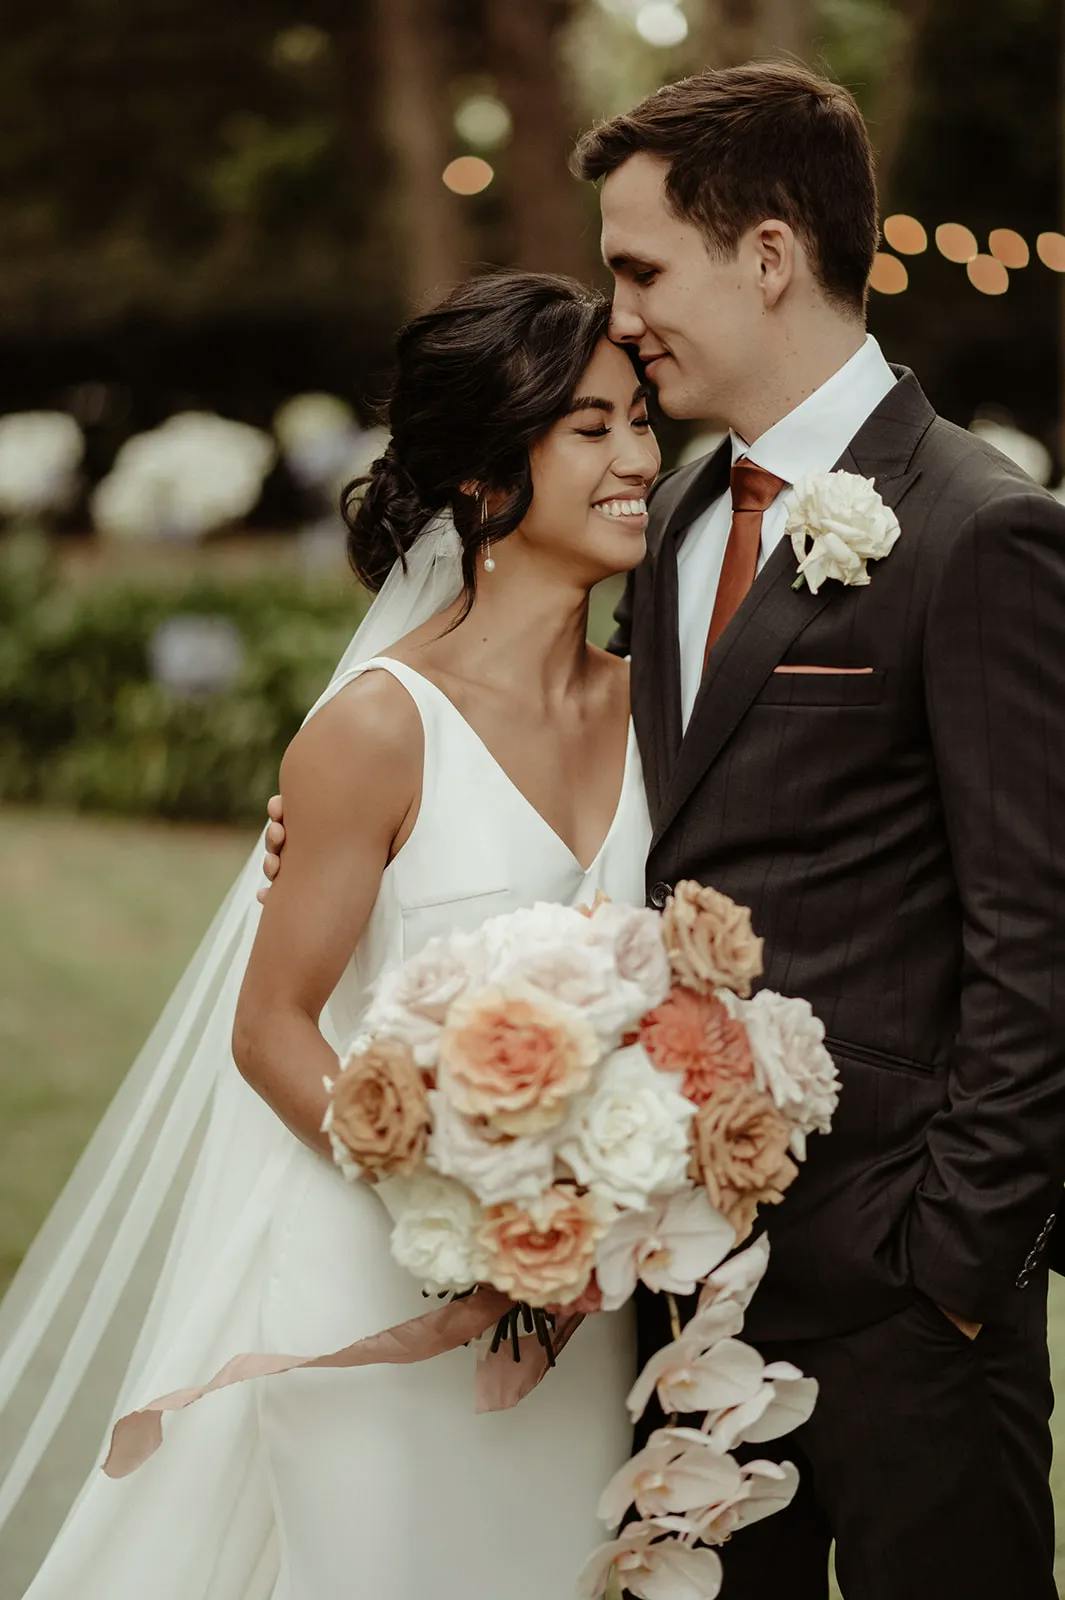 A bride and groom share a loving moment outdoors. The bride, in a white dress with a veil, holds a bouquet of flowers and smiles with closed eyes, while the groom, in a dark suit with an orange tie, gently leans his forehead against hers. The background is lush and green.